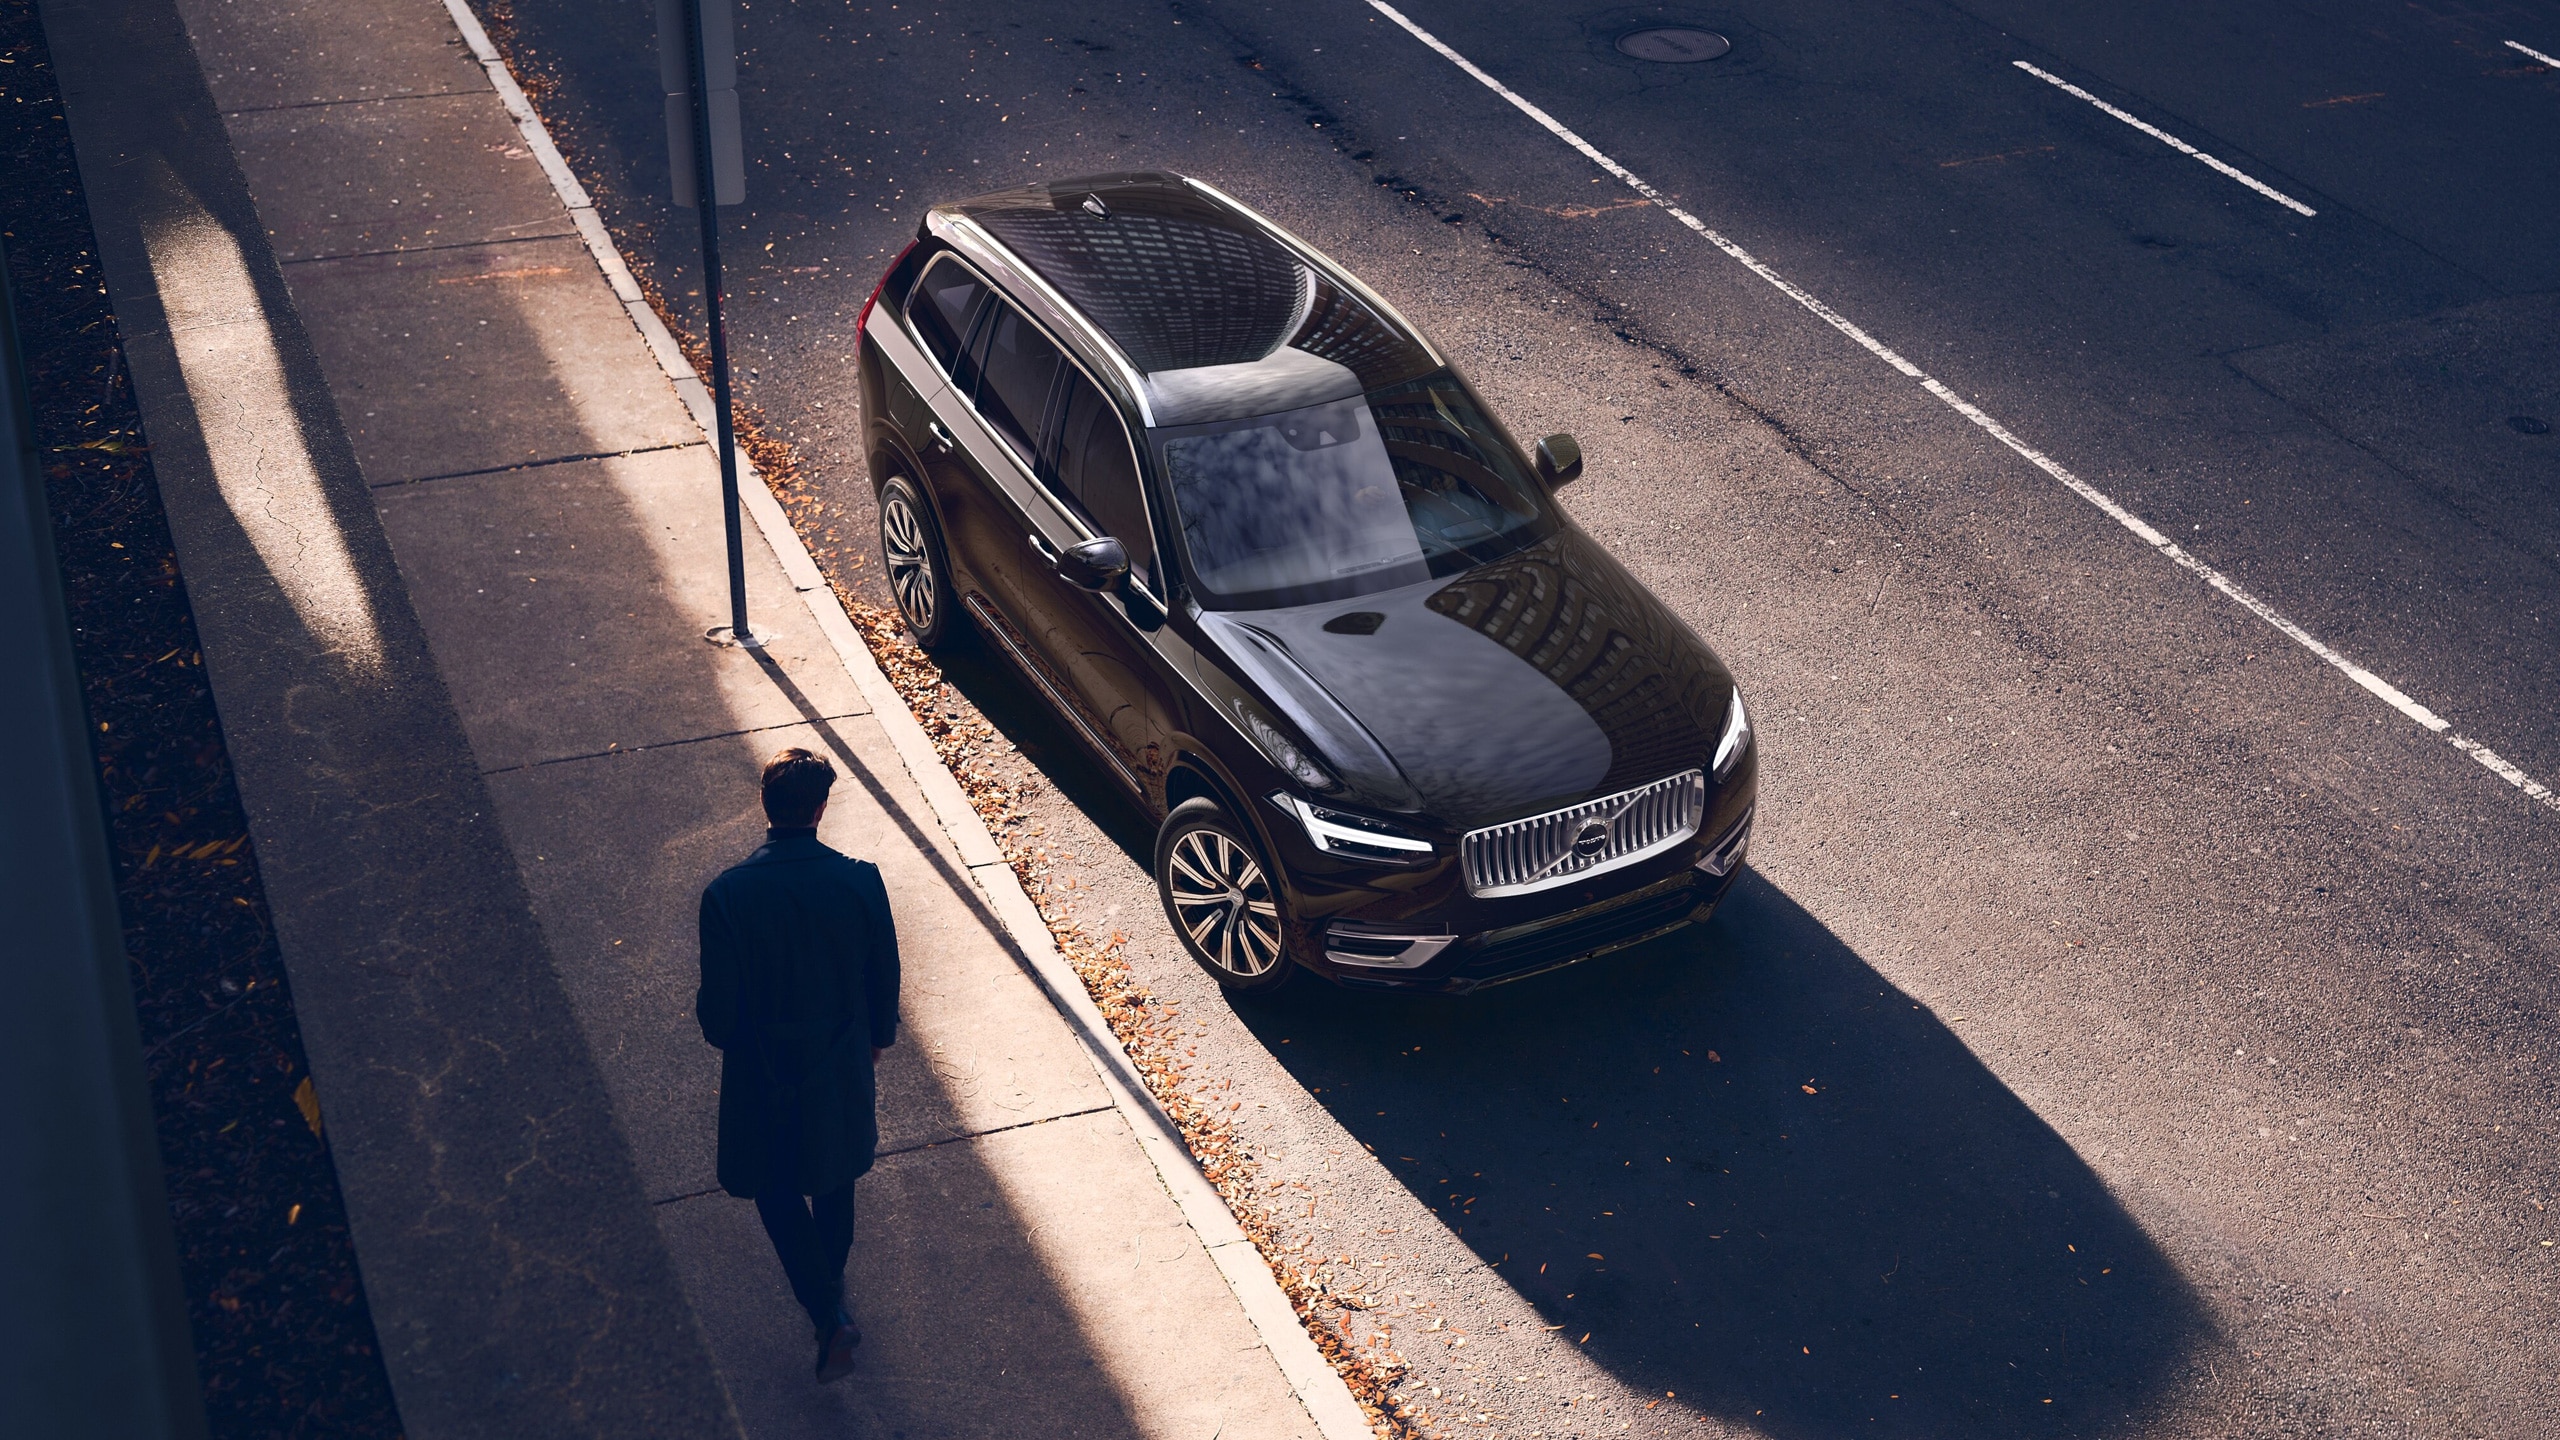 Front shot from above of the Volvo XC90 in Onyx Black parked in a street with an approaching man, the sun stands low and casts long shadows.